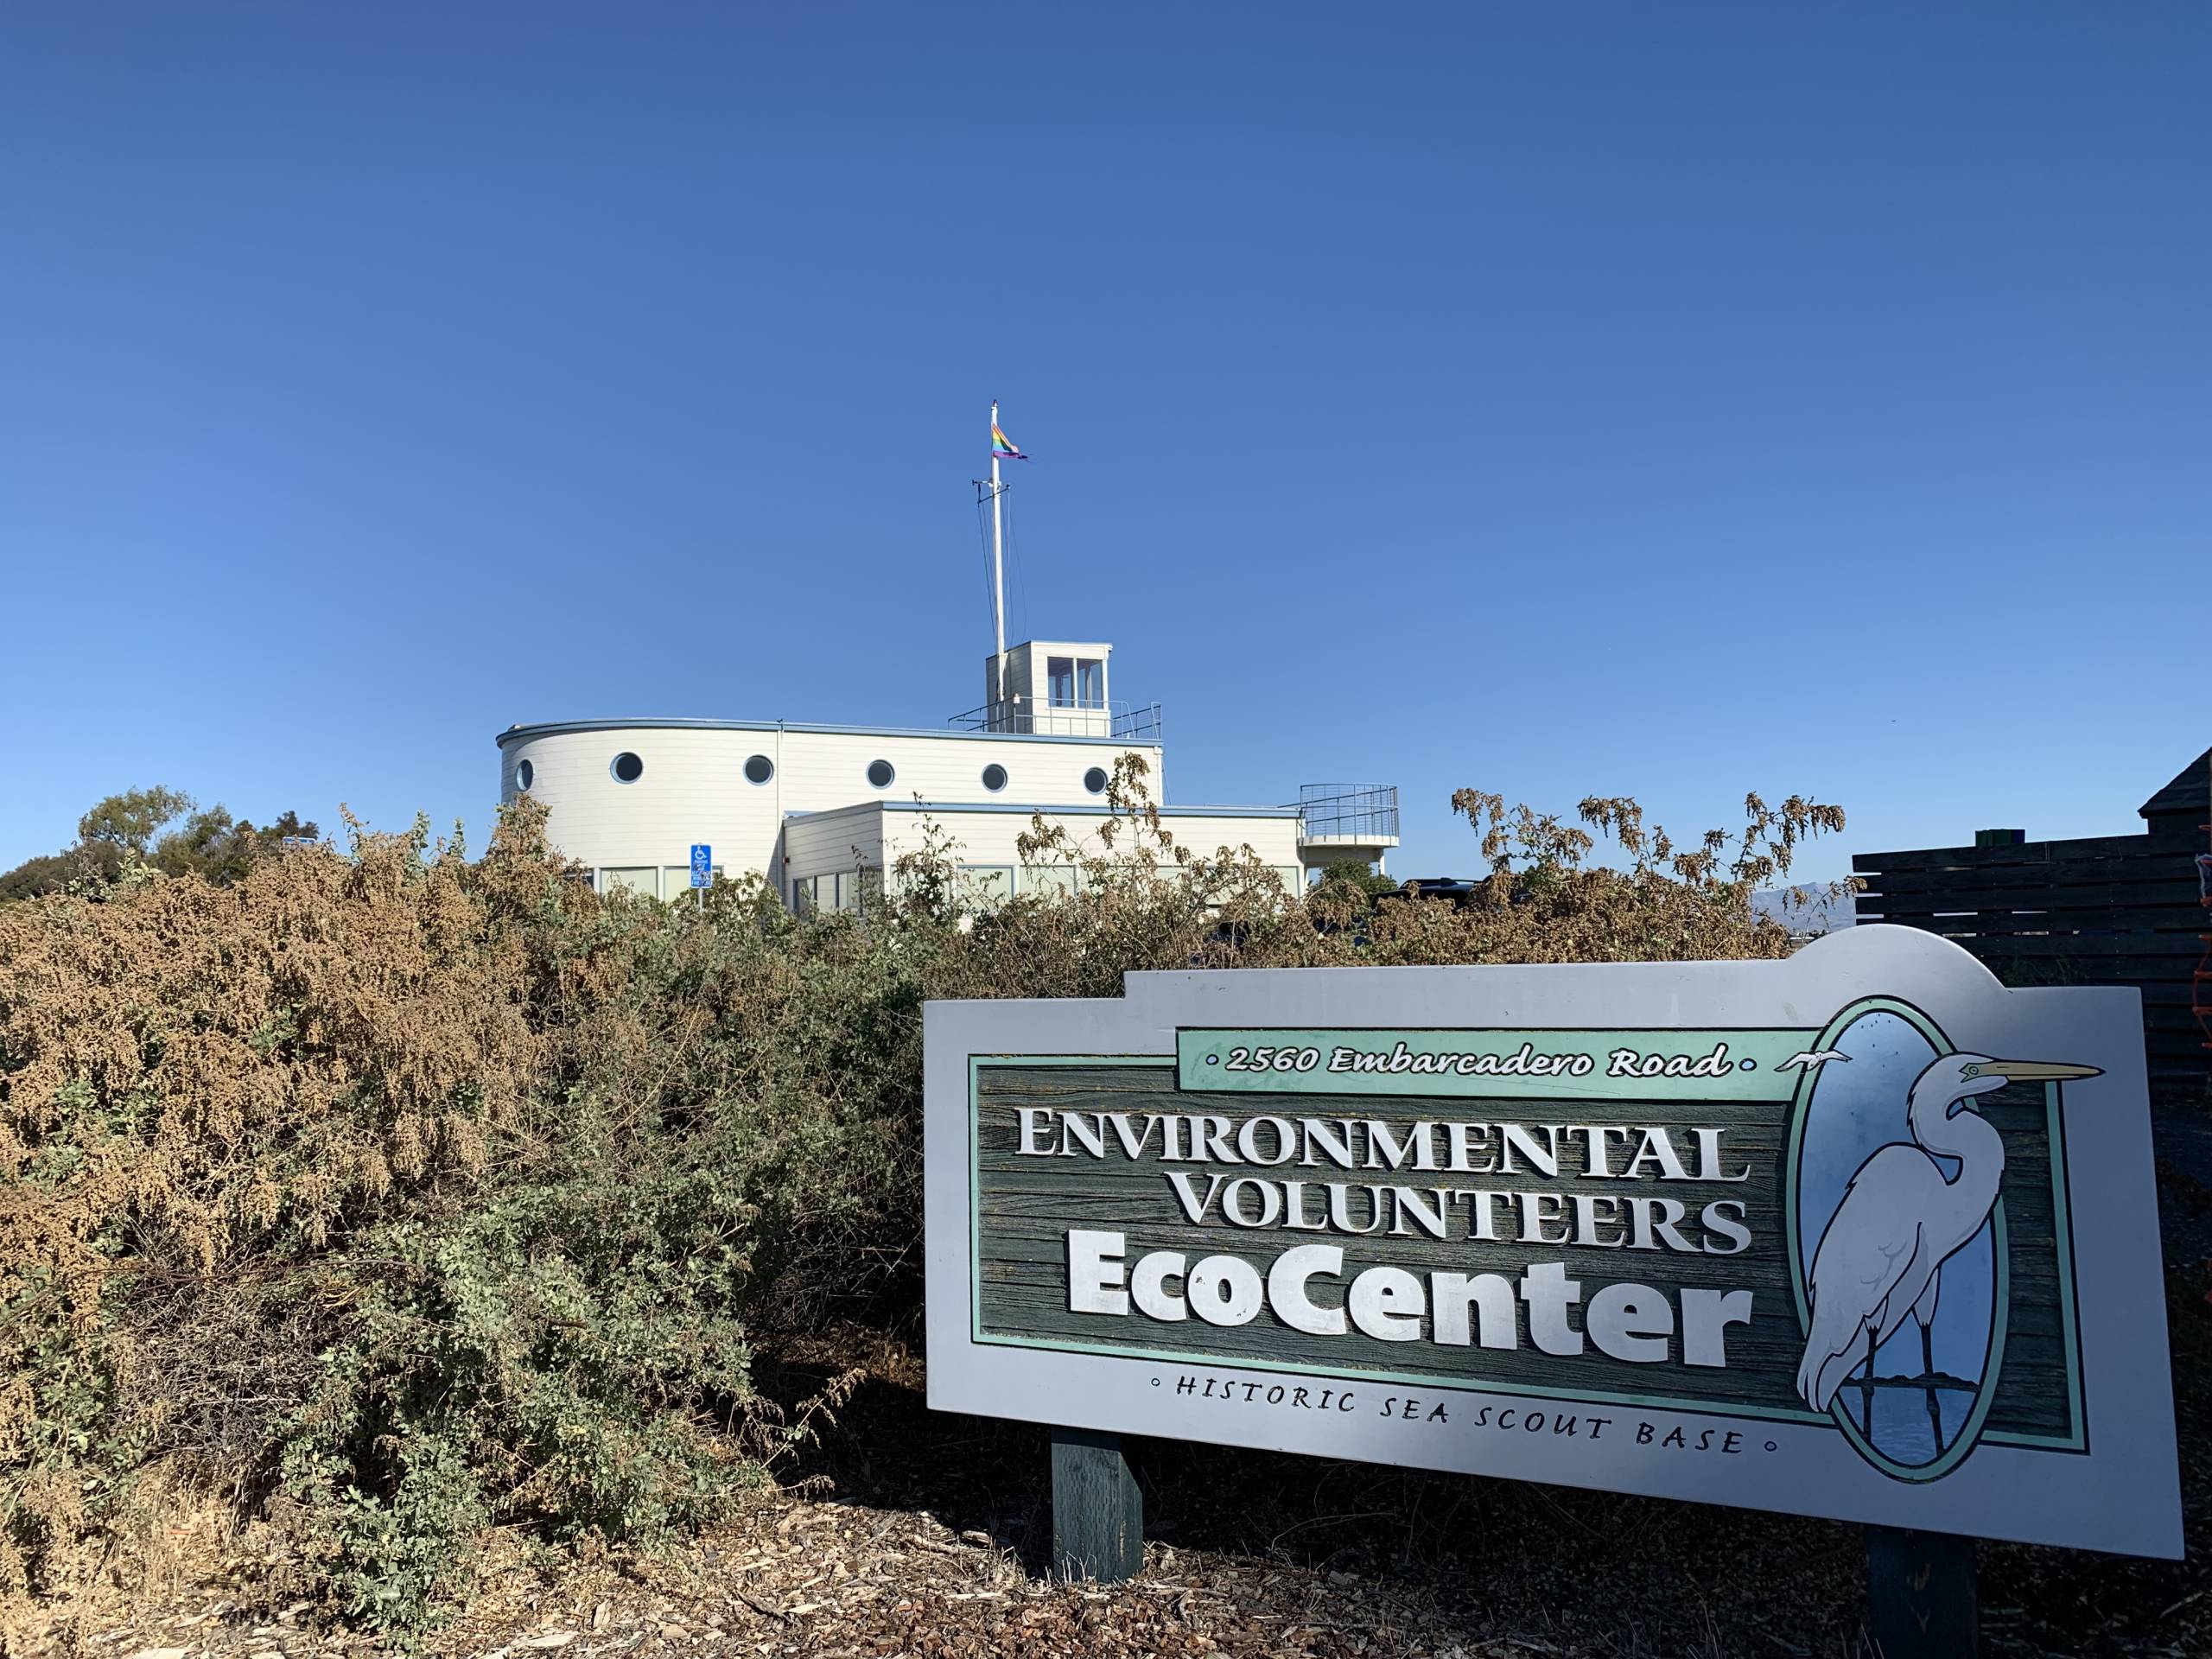 A big sign by a building that looks like a boat says "Environmental Volunteers EcoCenter."